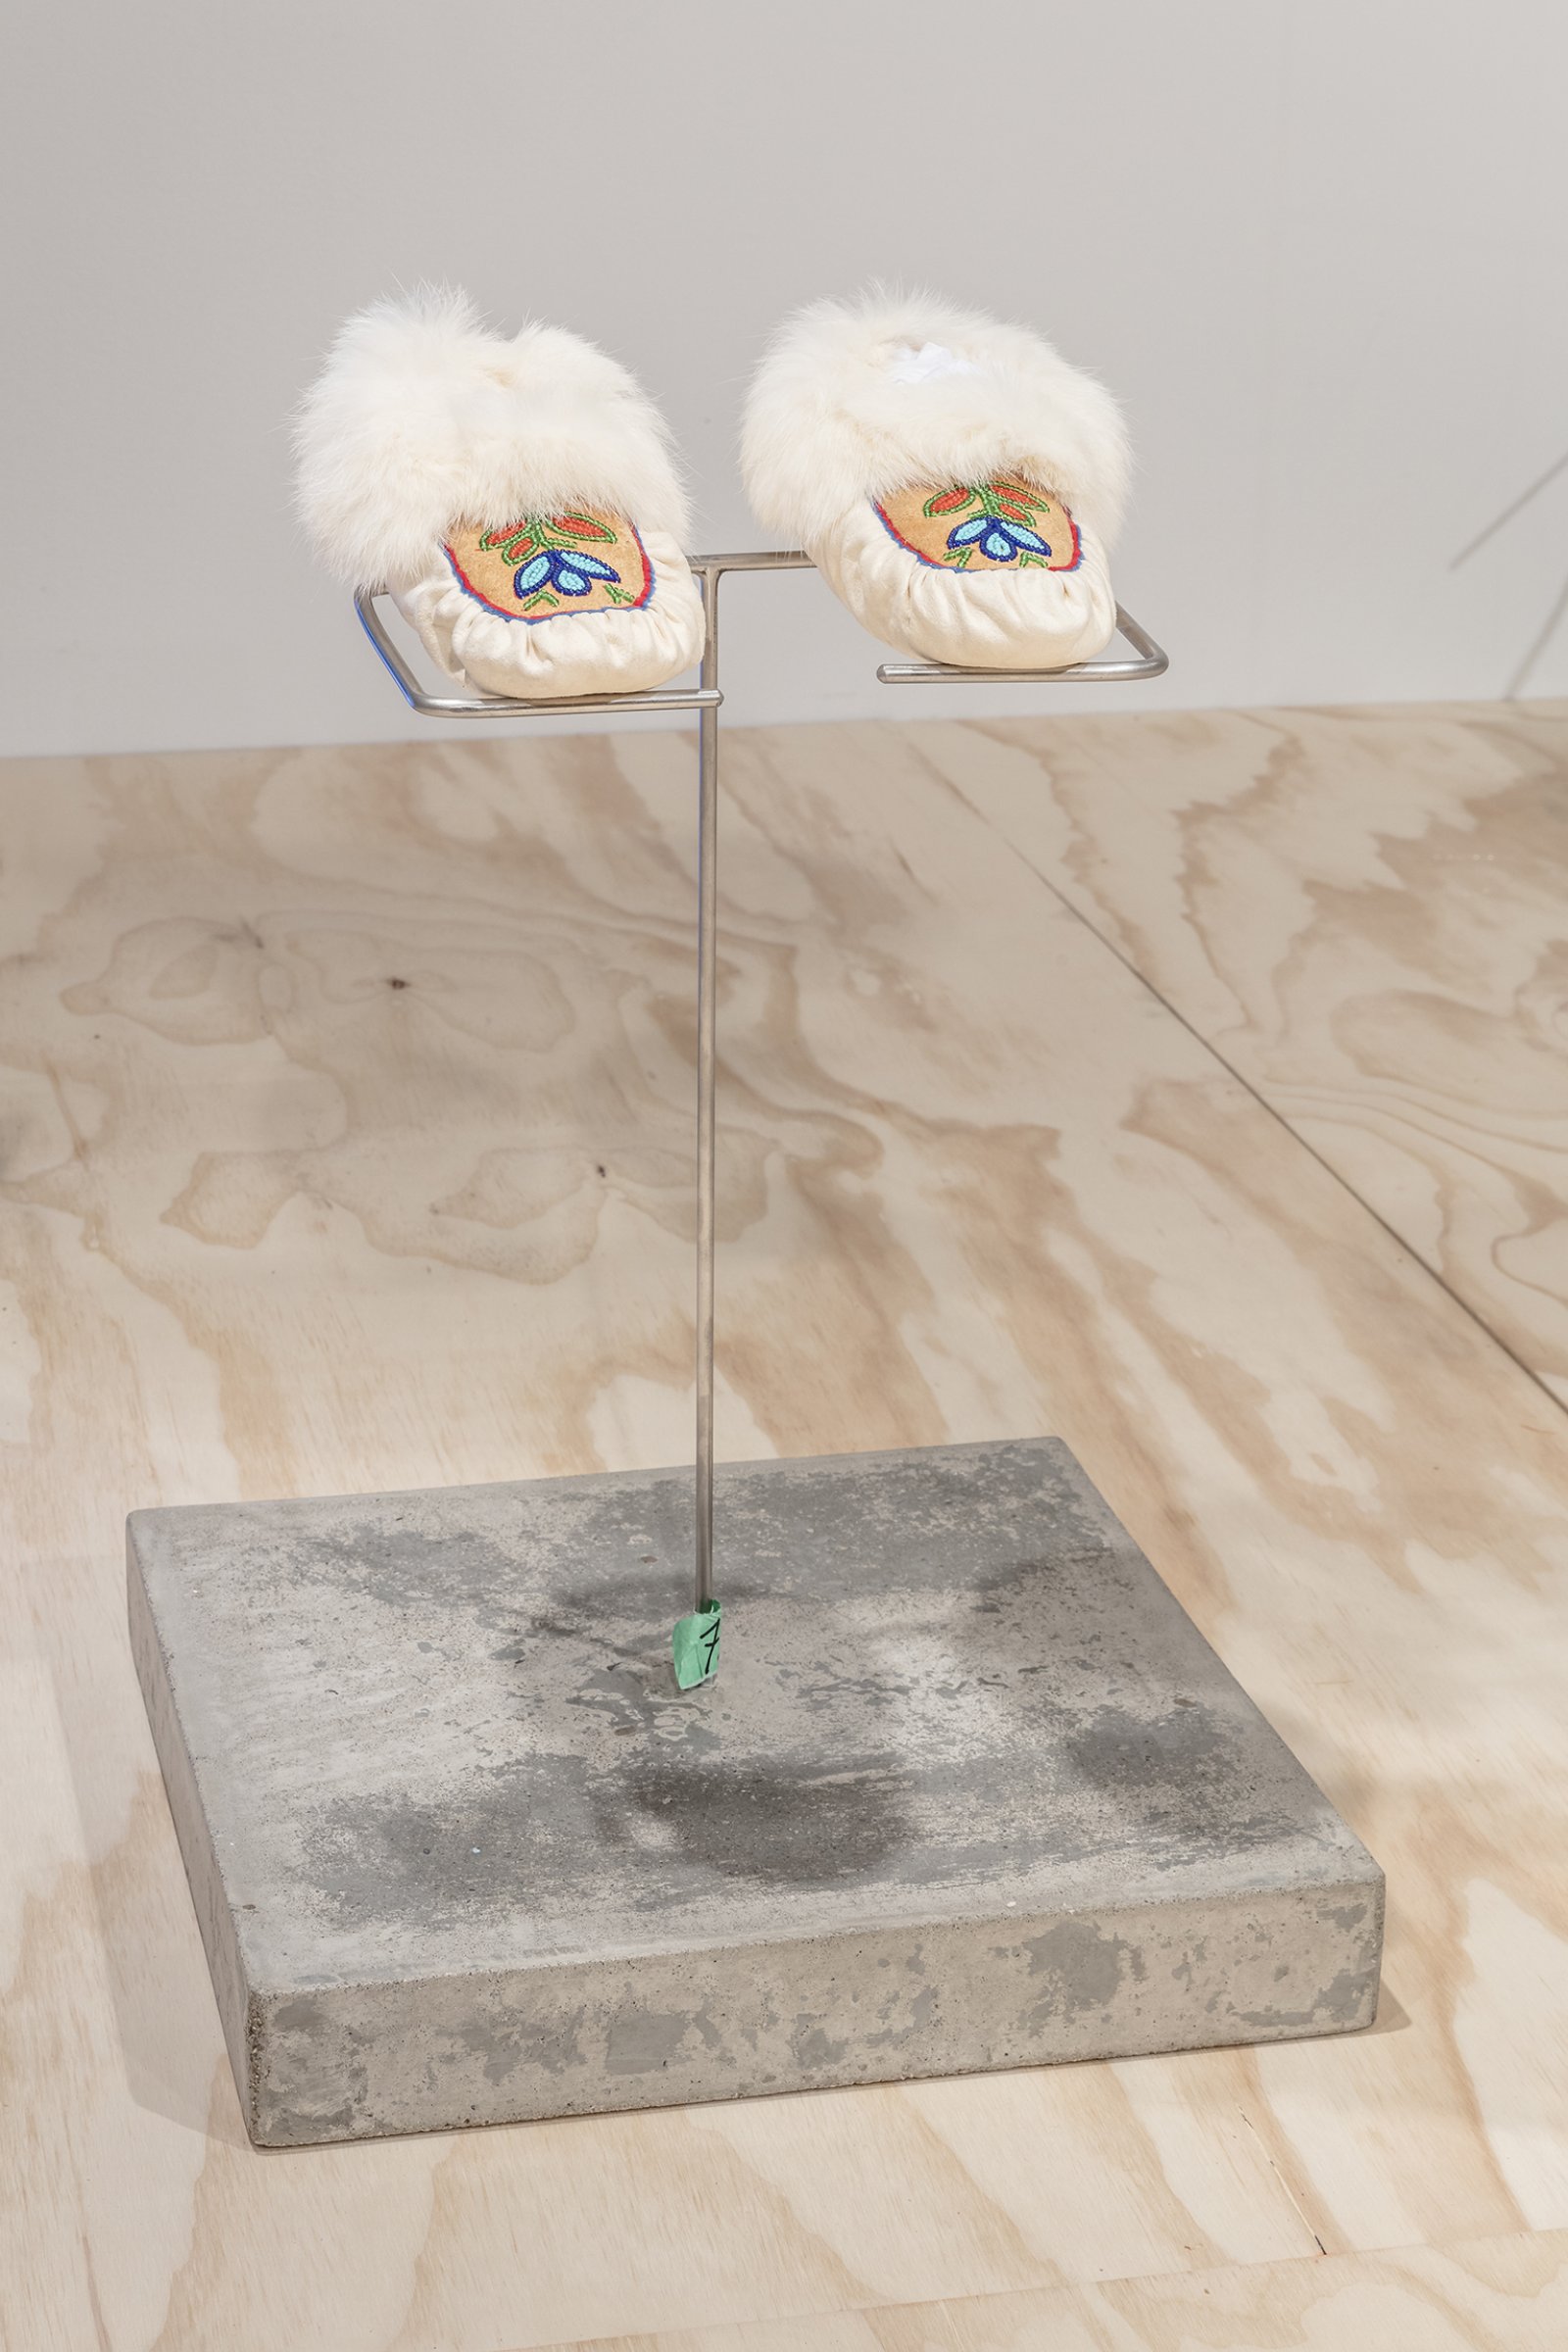 Duane Linklater, Speculative apparatus 1 for the work of nohkompan, 2016, concrete, welded stainless steel, tape, 16 x 16 x 19 in. (41 x 41 x 48 cm), with Beaded Slippers, c. 1980, by Ethel Linklater from the Collection of Thunder Bay Art Gallery, moosehide, caribou hide, rabbit fur, beads, 9 x 4 in. (23 x 9 cm). Installation view, From Our Hands, Mercer Union, Toronto, 2016